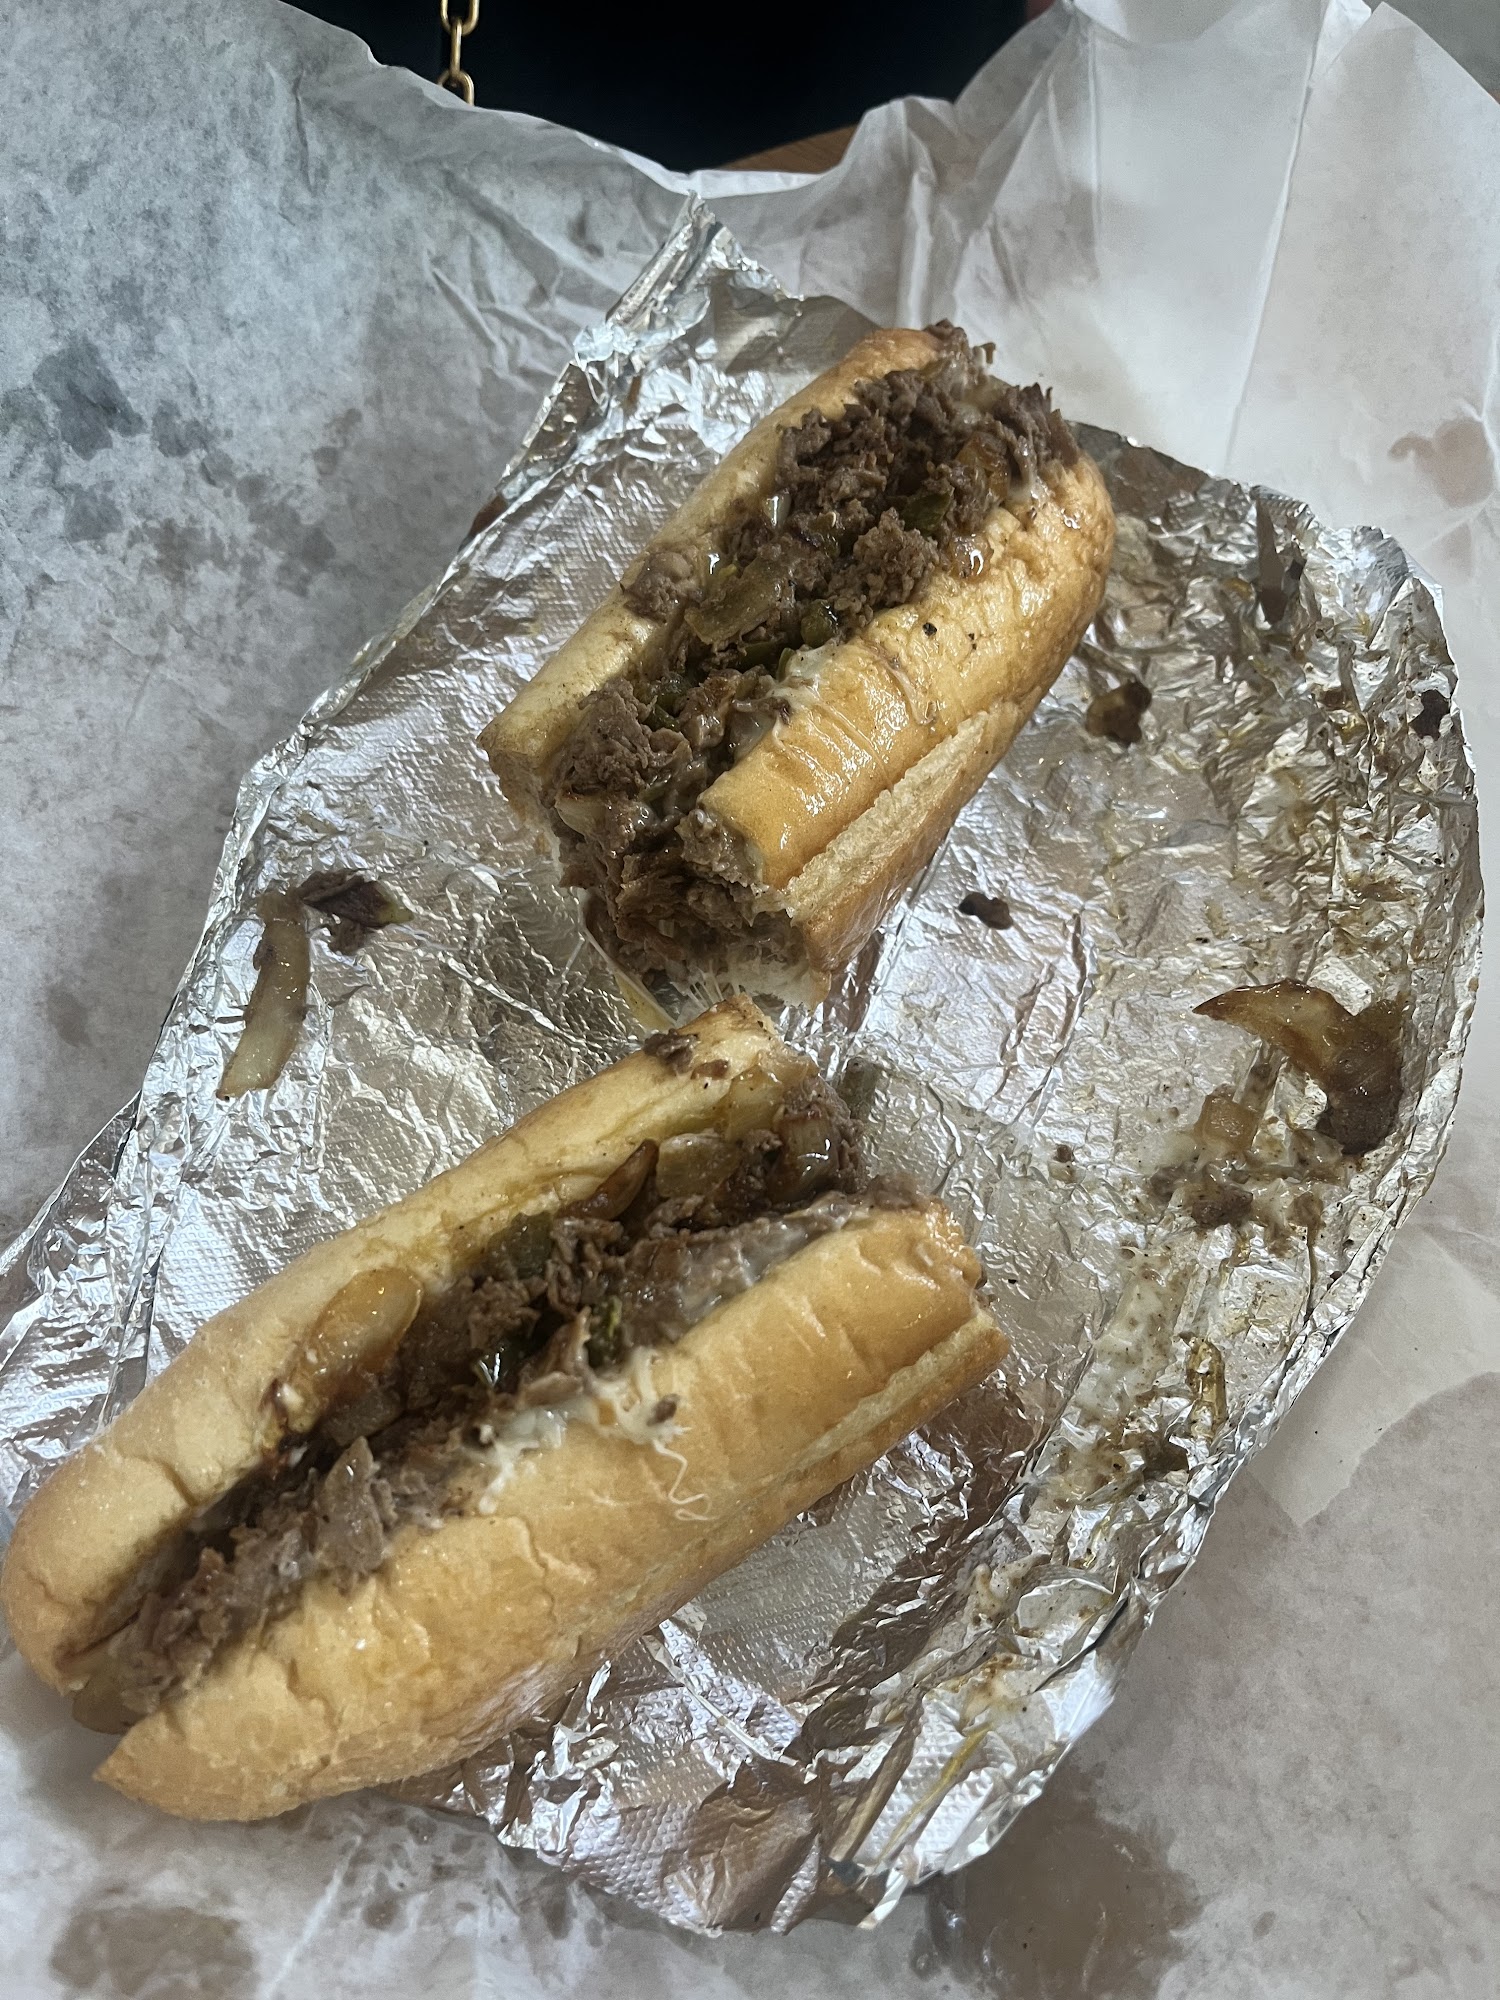 Philly G Steaks - The Works